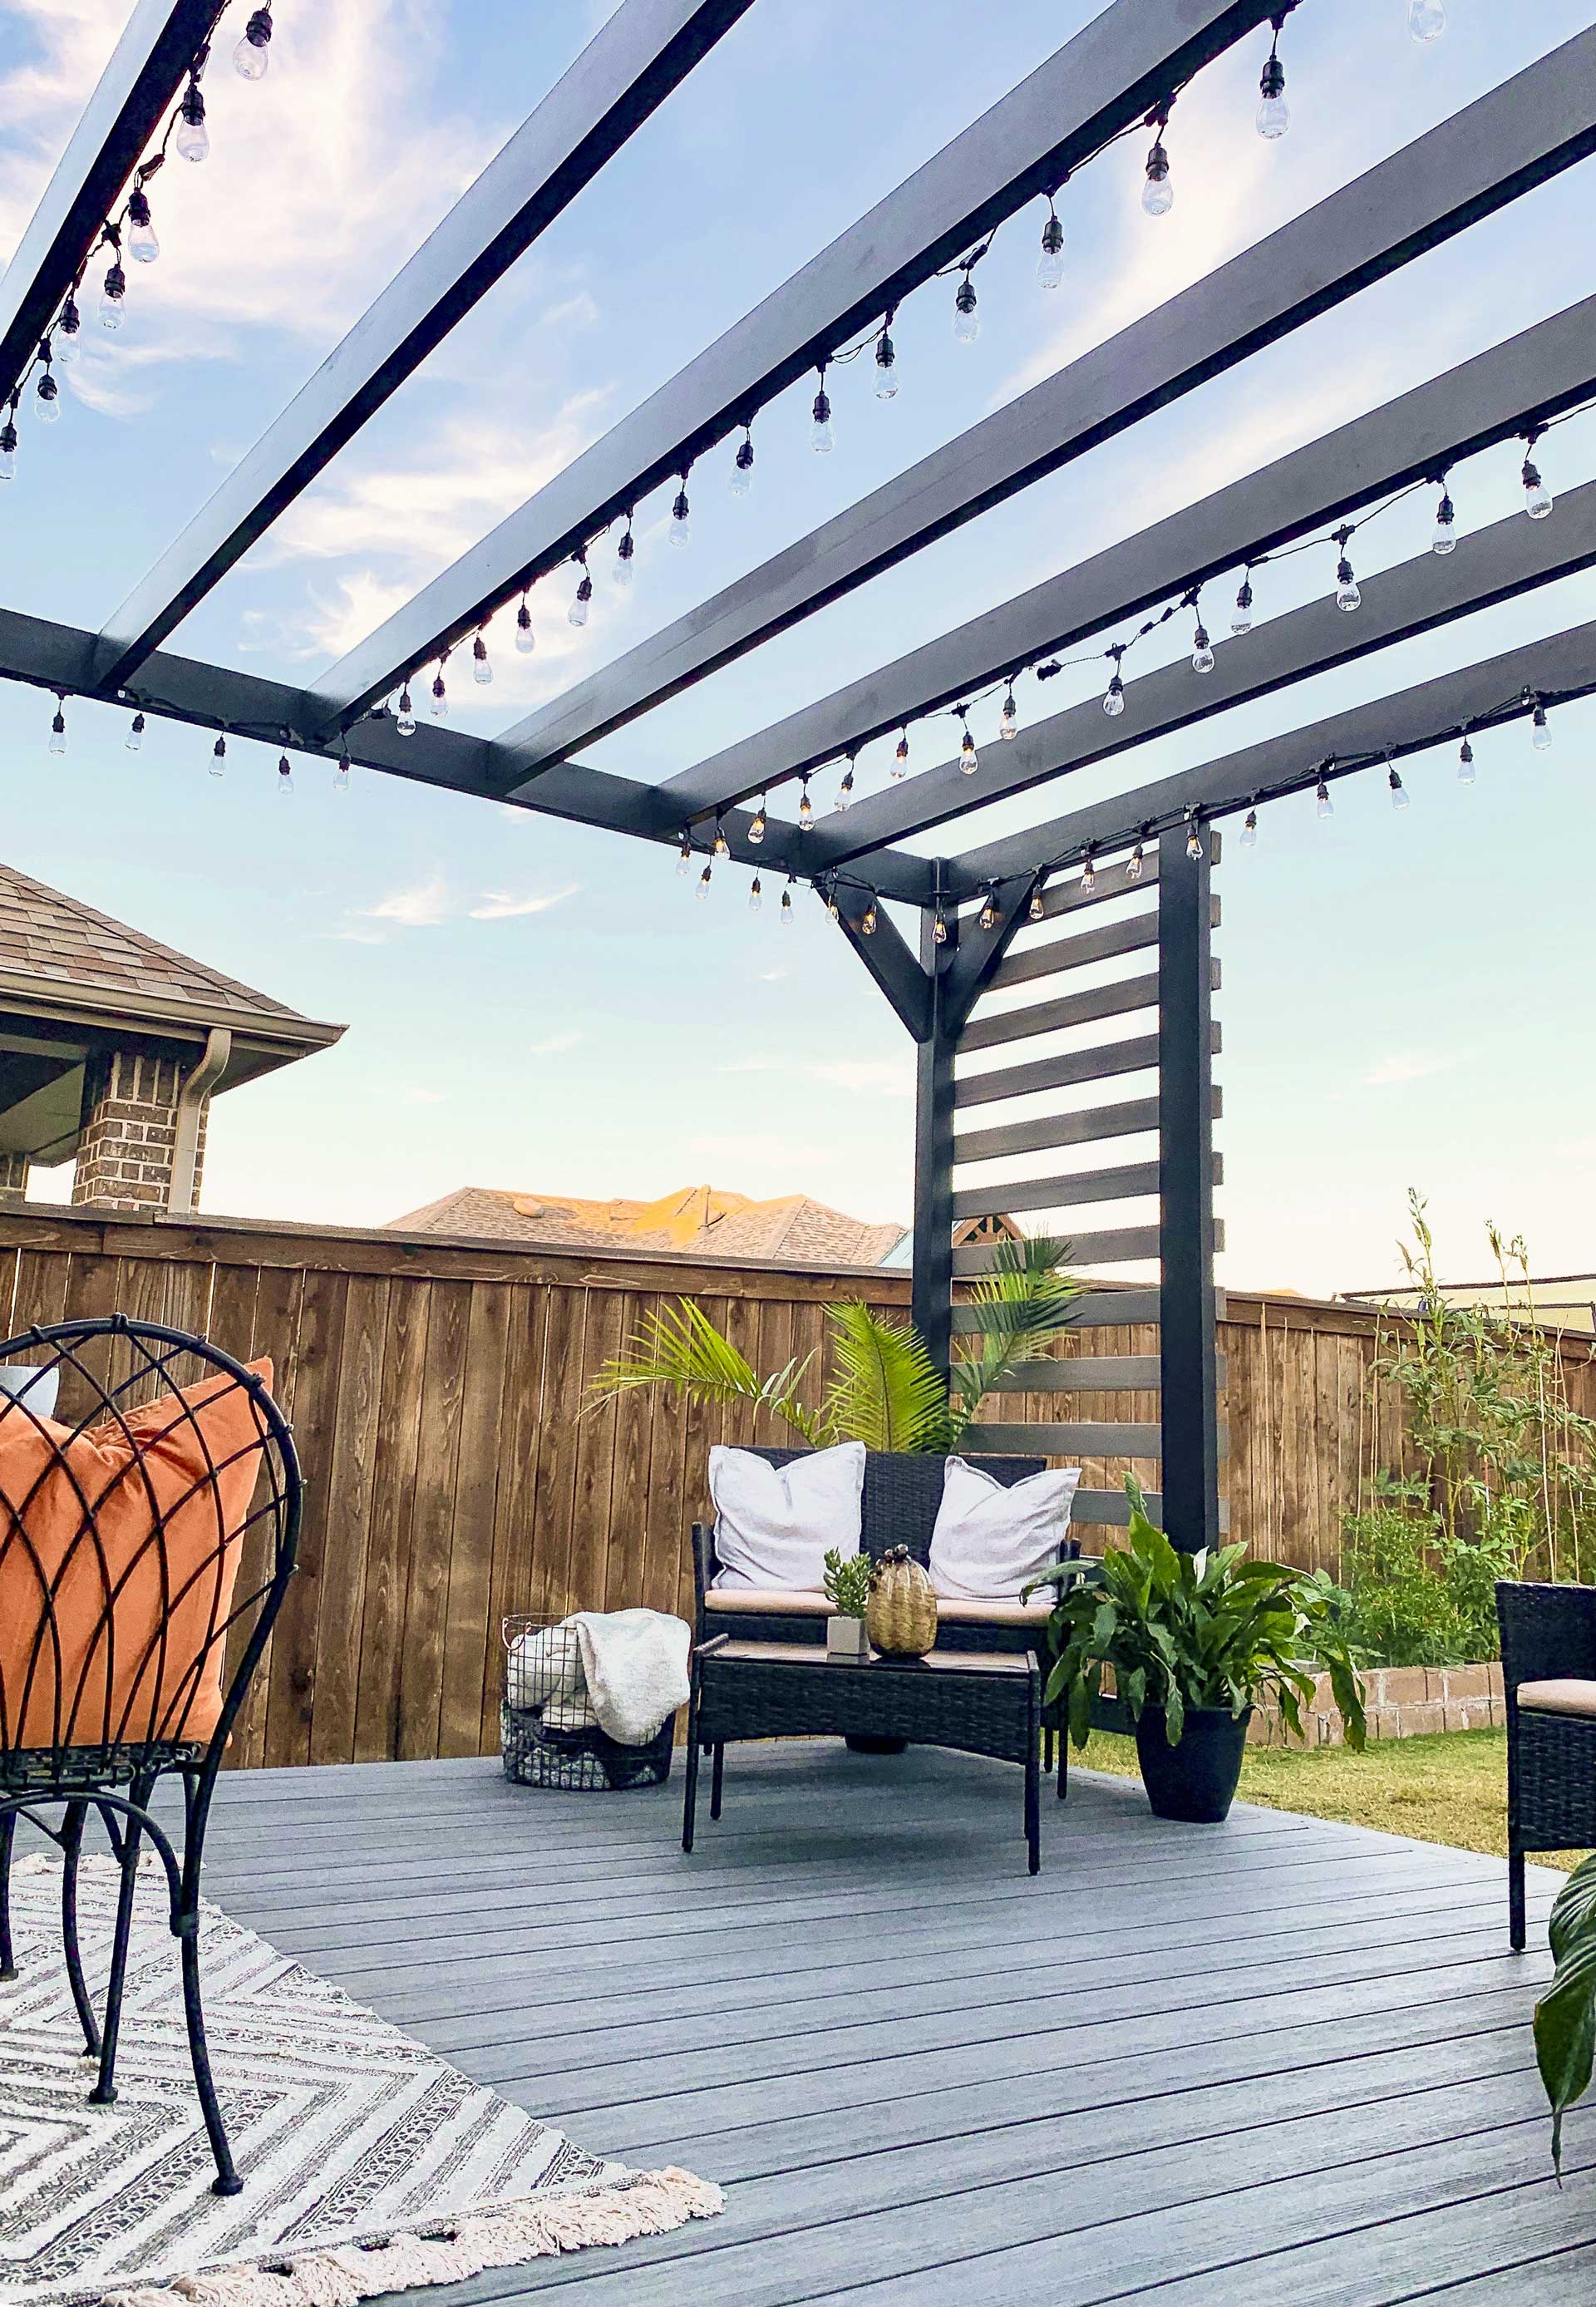 Cozy backyard with steel pergola adorned with string lights, seating area, and potted plants